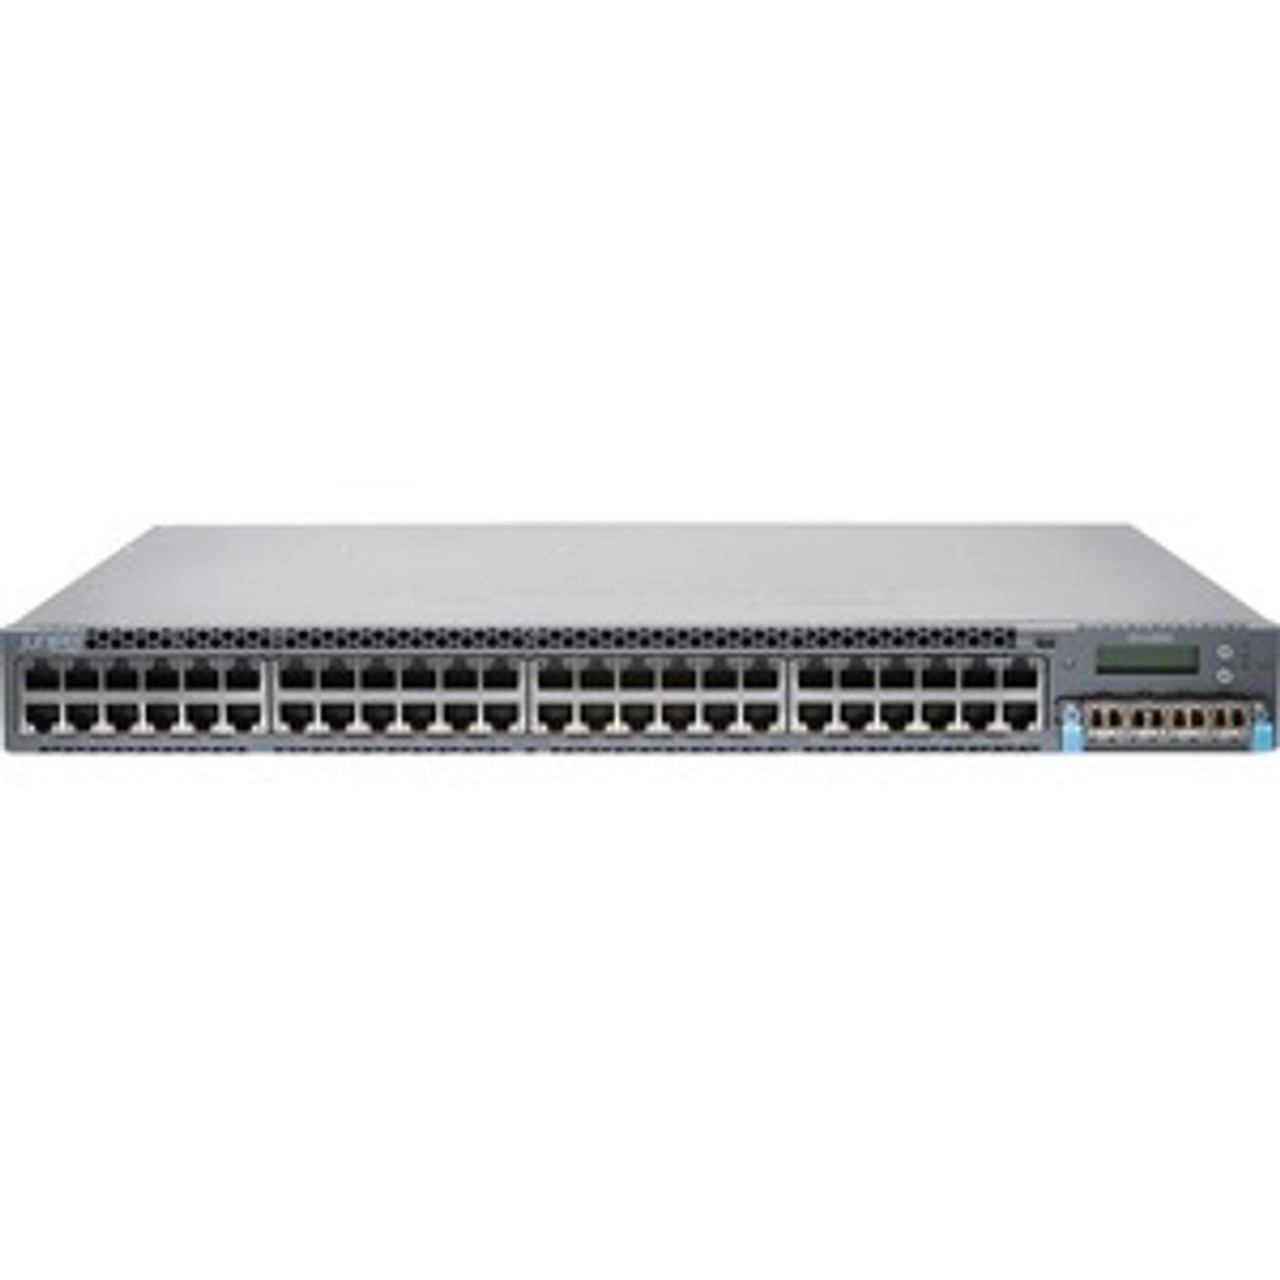 B-EX4300-48P-5S-E Juniper EX4300-48P Ethernet Switch - 48 Ports - Manageable - 3 Layer Supported - Modular - Twisted Pair, Optical Fiber - 1U High - Rack-mountable,